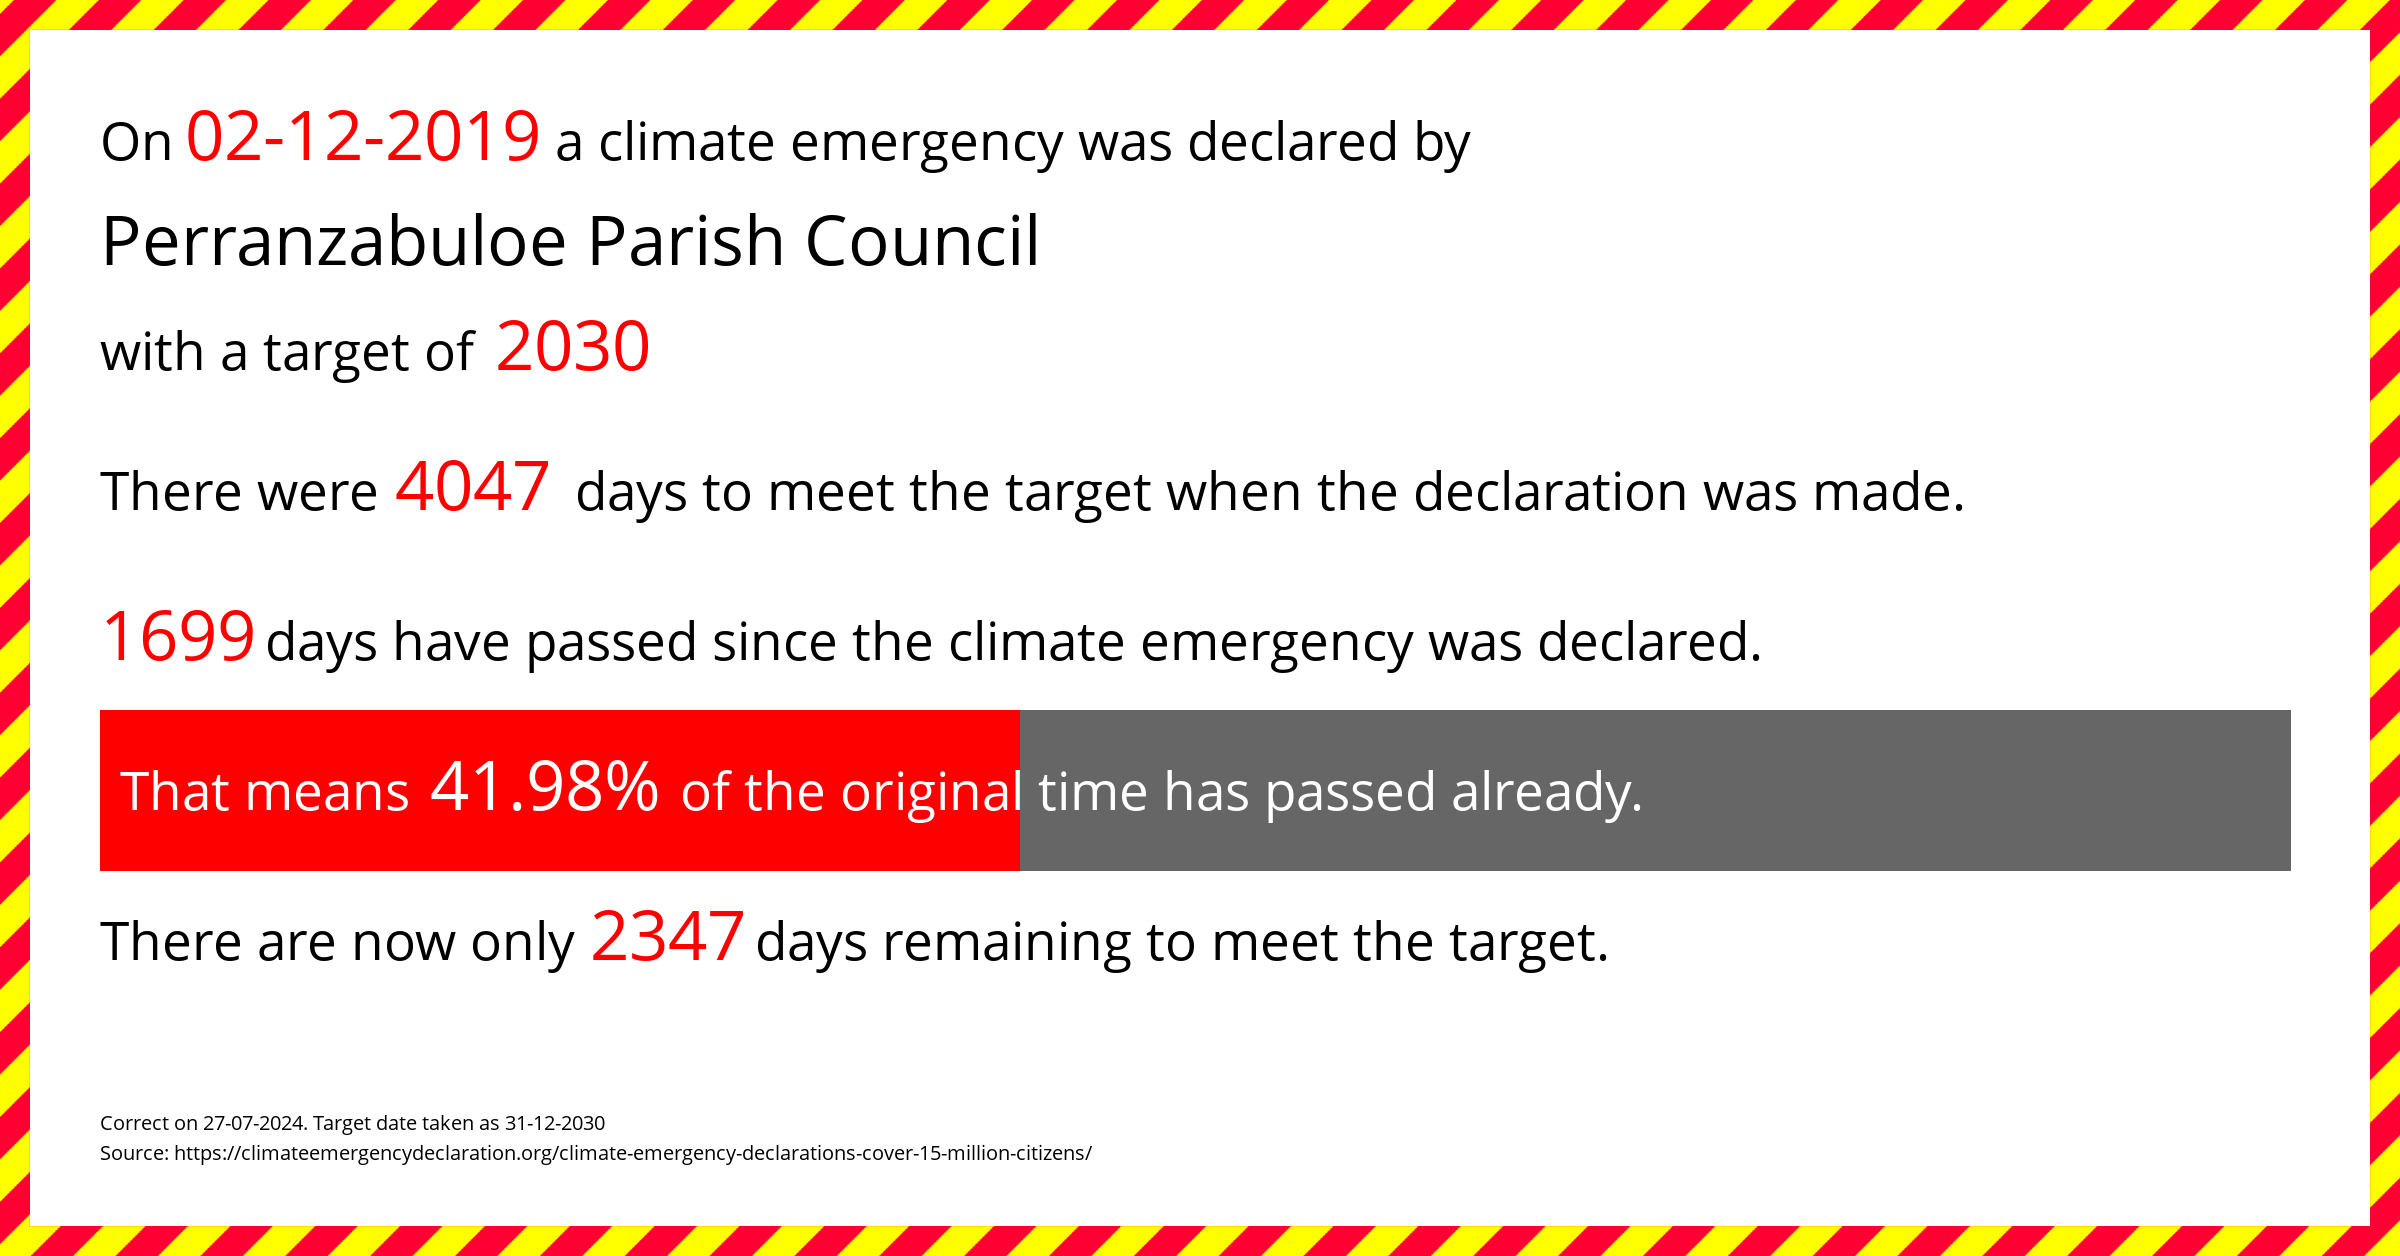 Perranzabuloe Parish Council declared a Climate emergency on Monday 2nd December 2019, with a target of 2030.